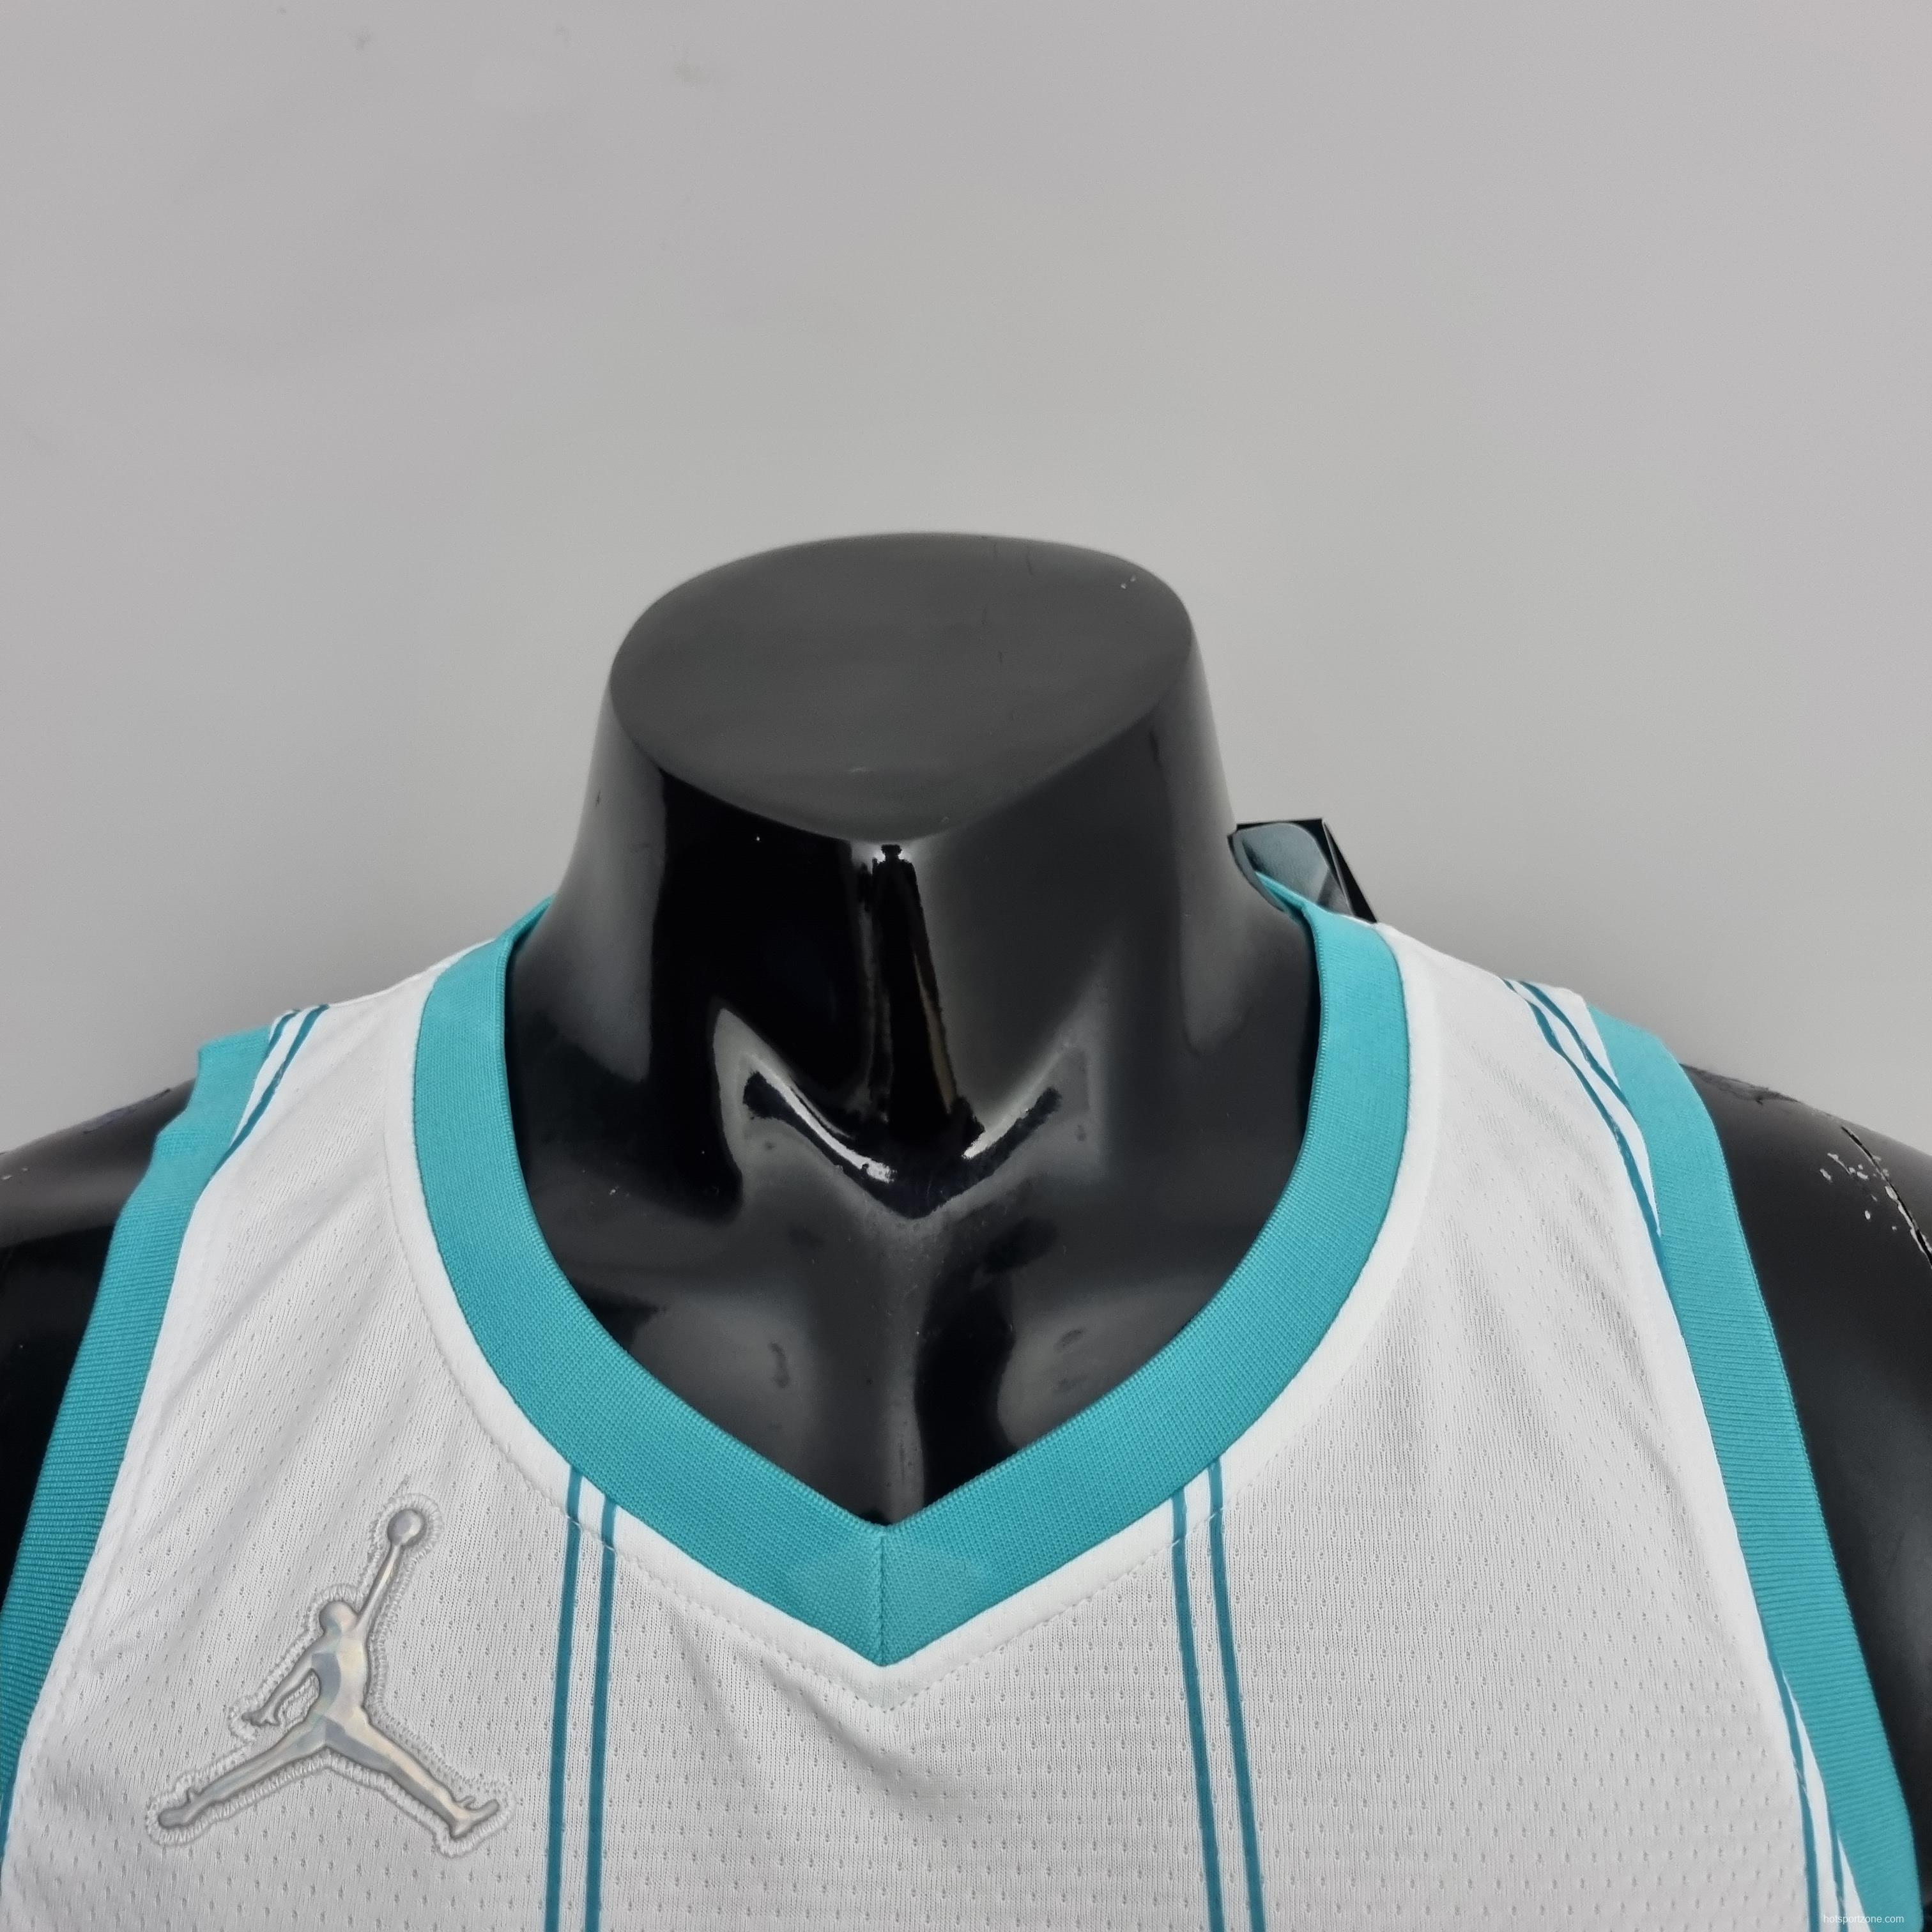 75th Anniversary Oubre #12 Charlotte Hornets White NBA Jersey